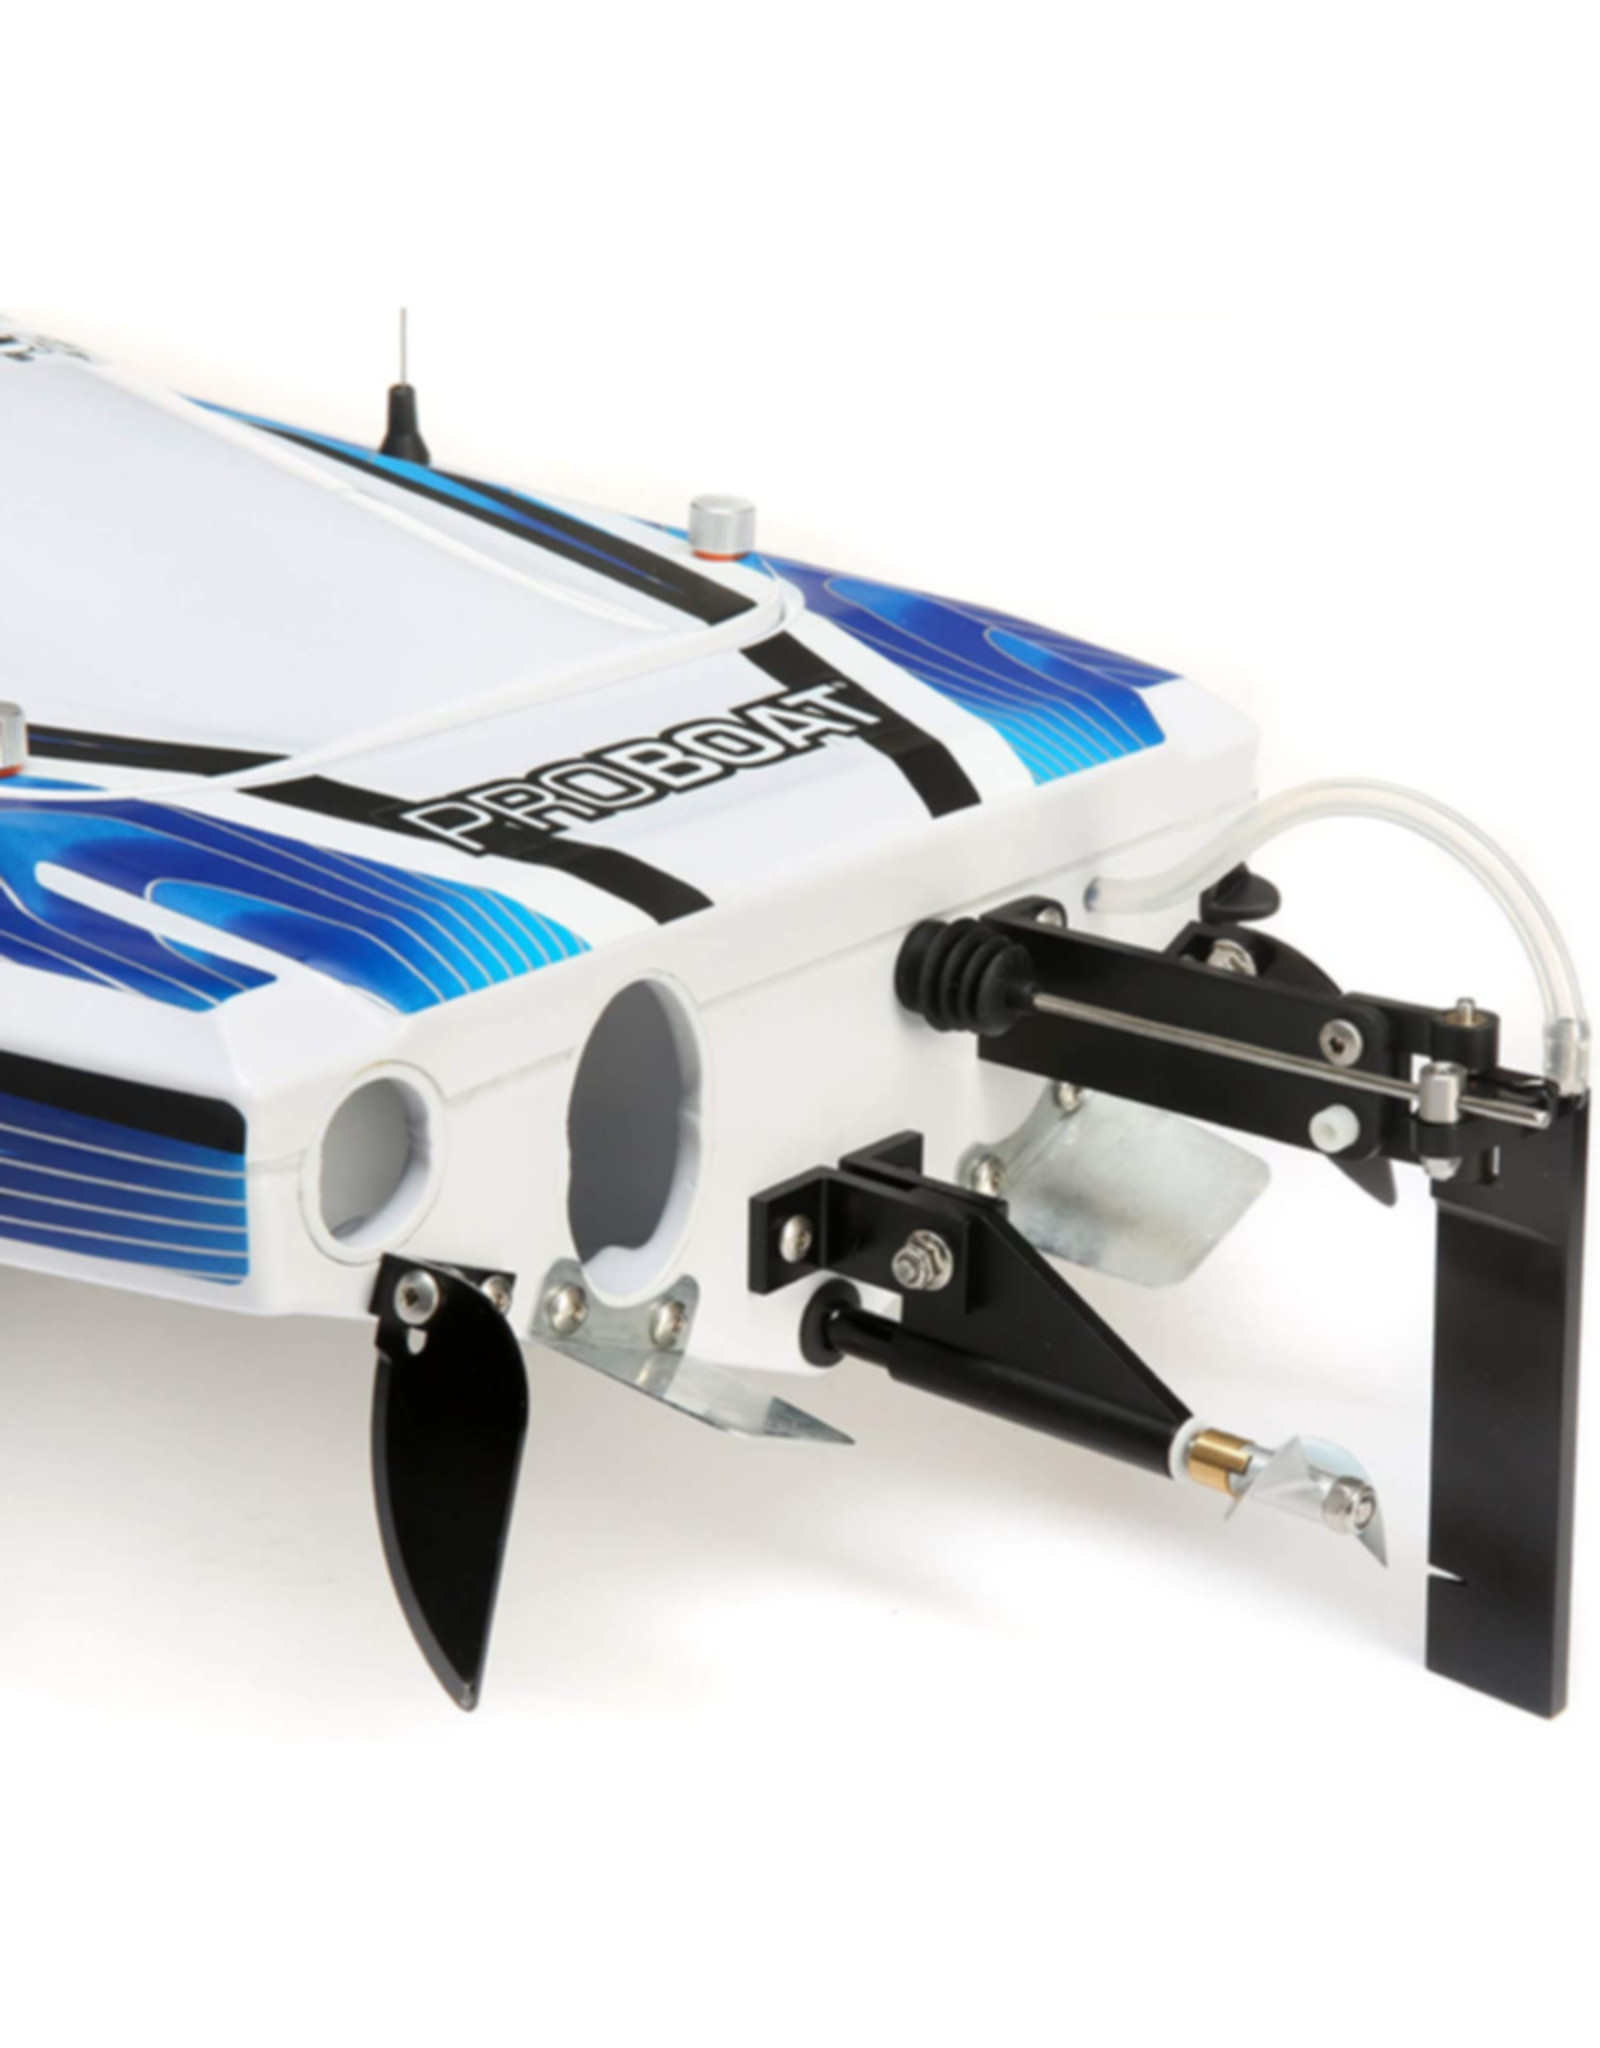 Proboat PRB08032T1 BLUE Sonicwake 36" Self-Righting Brushless Deep-V RTR, White